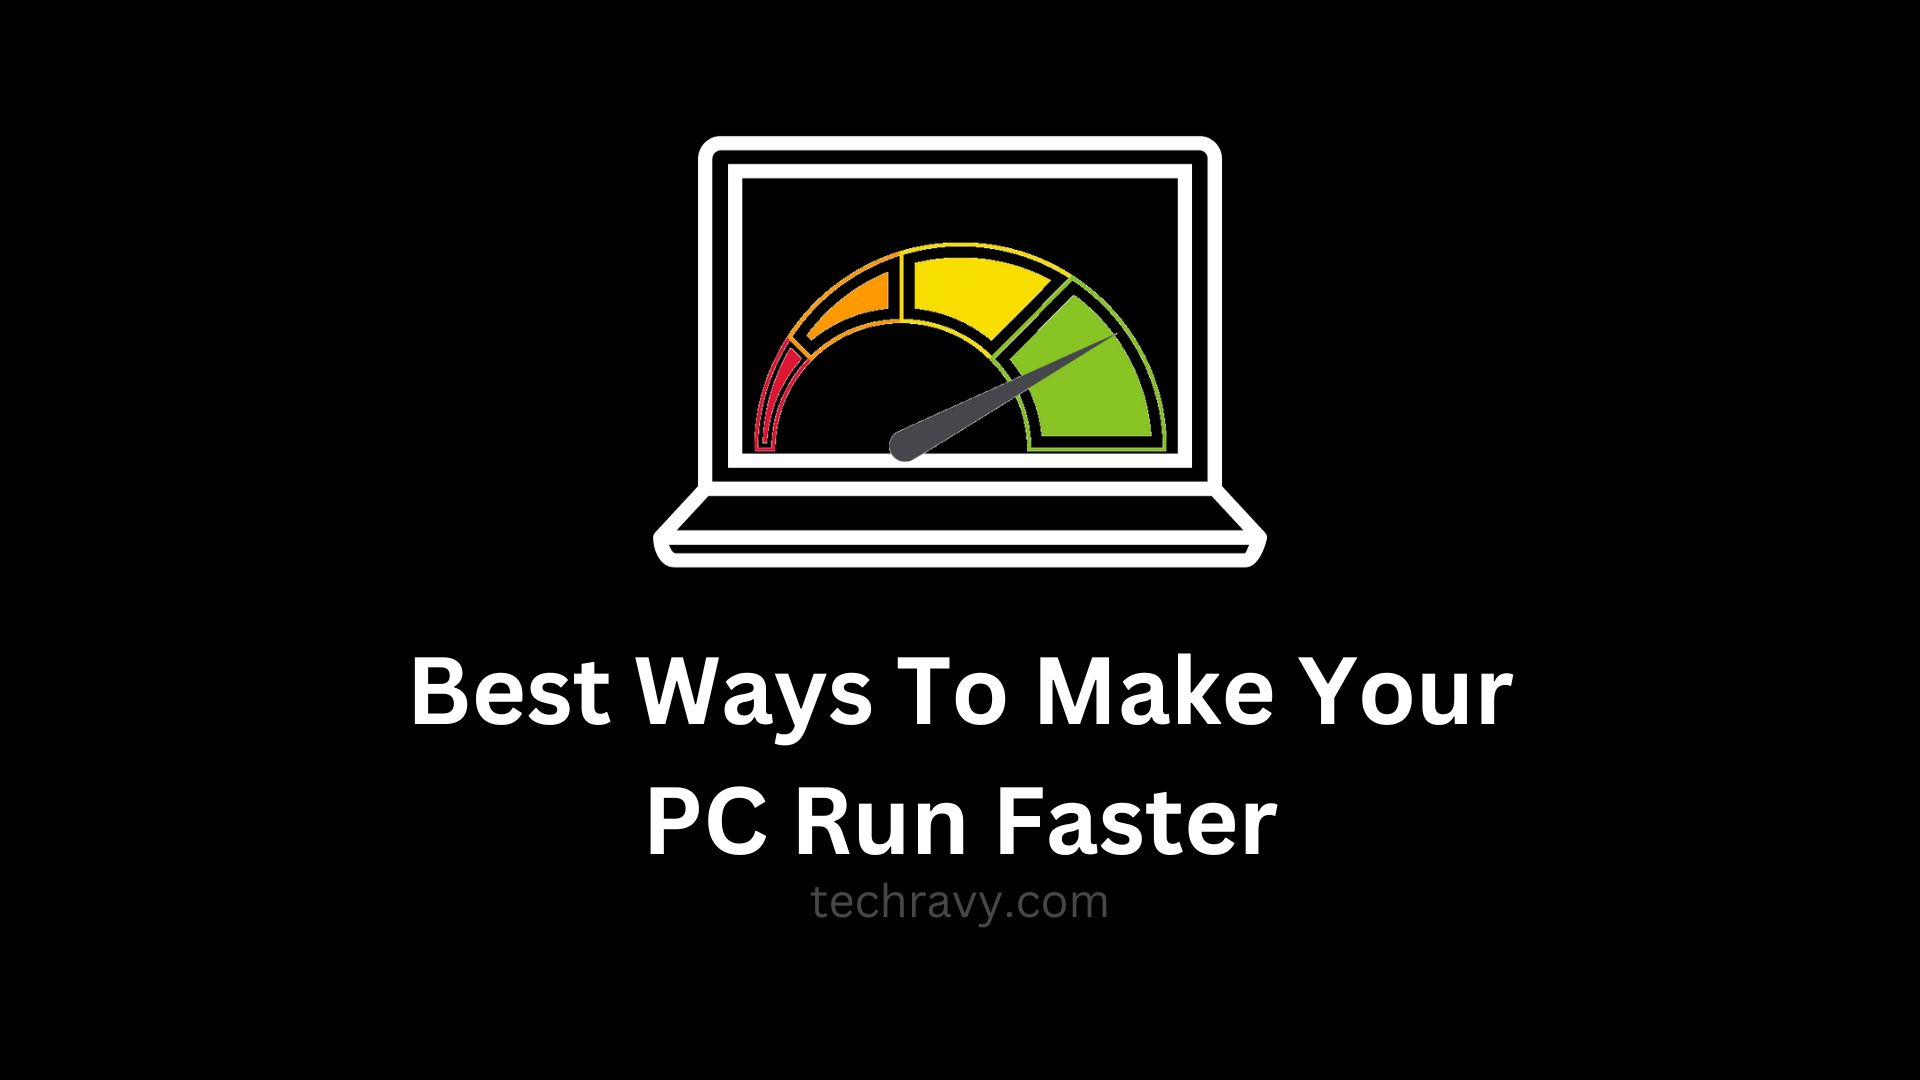 Best Ways To Make Your PC Run Faster